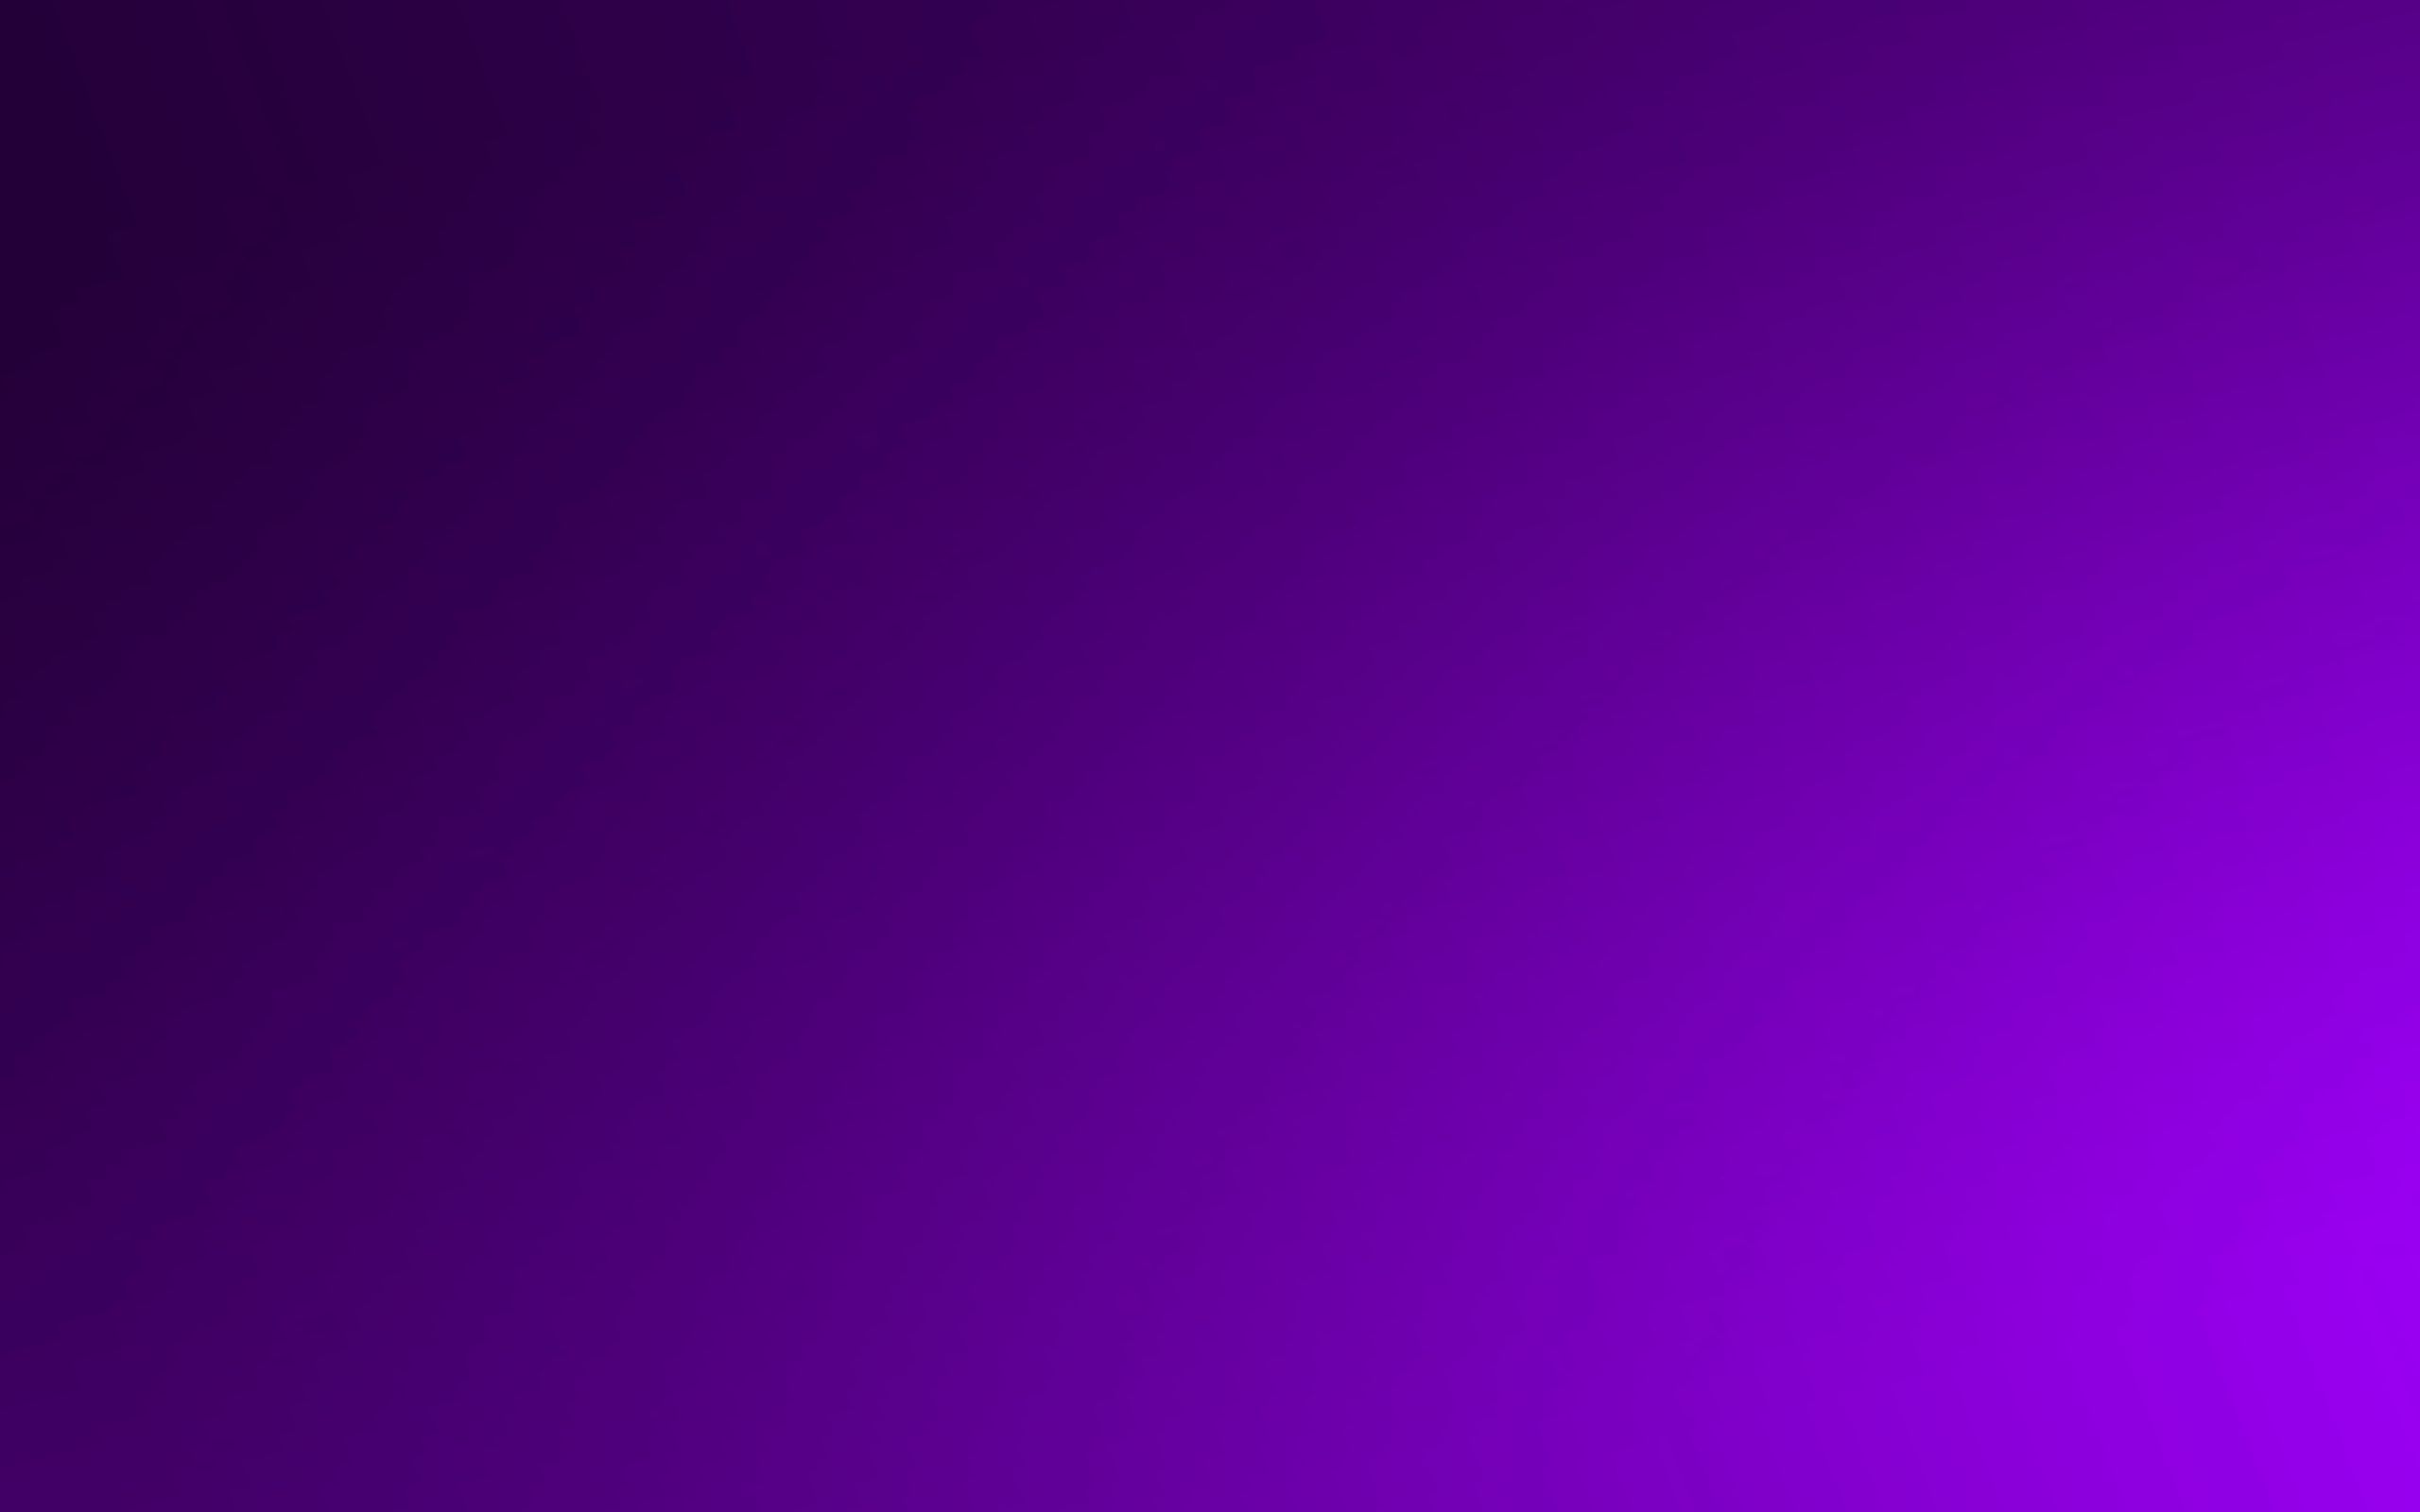 solid, violet, background, abstract, purple